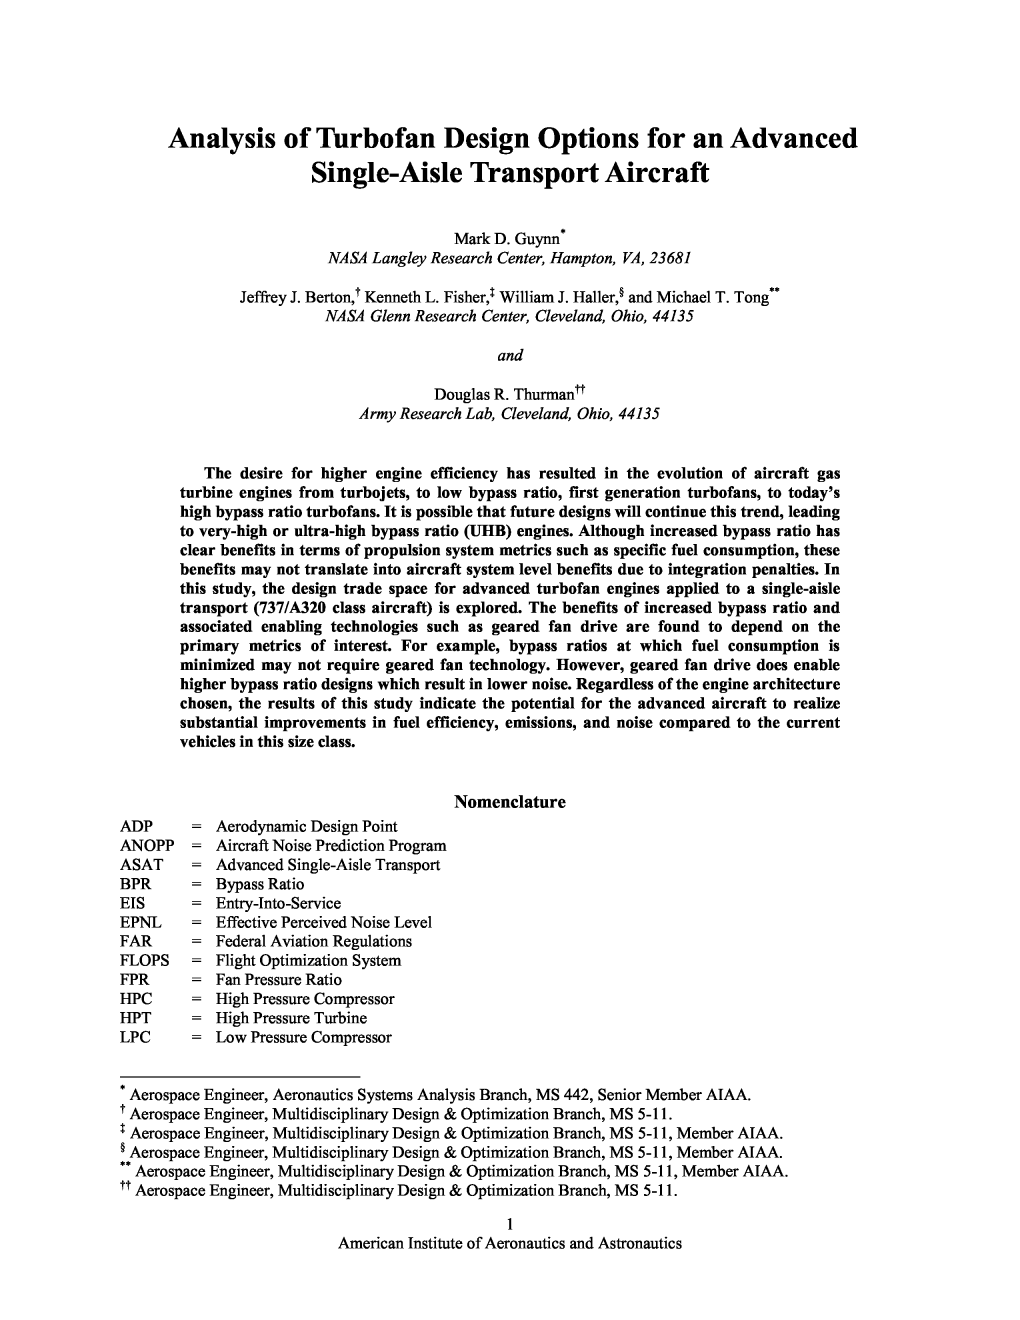 Analysis of Turbofan Design Options for an Advanced Single-Aisle Transport Aircraft